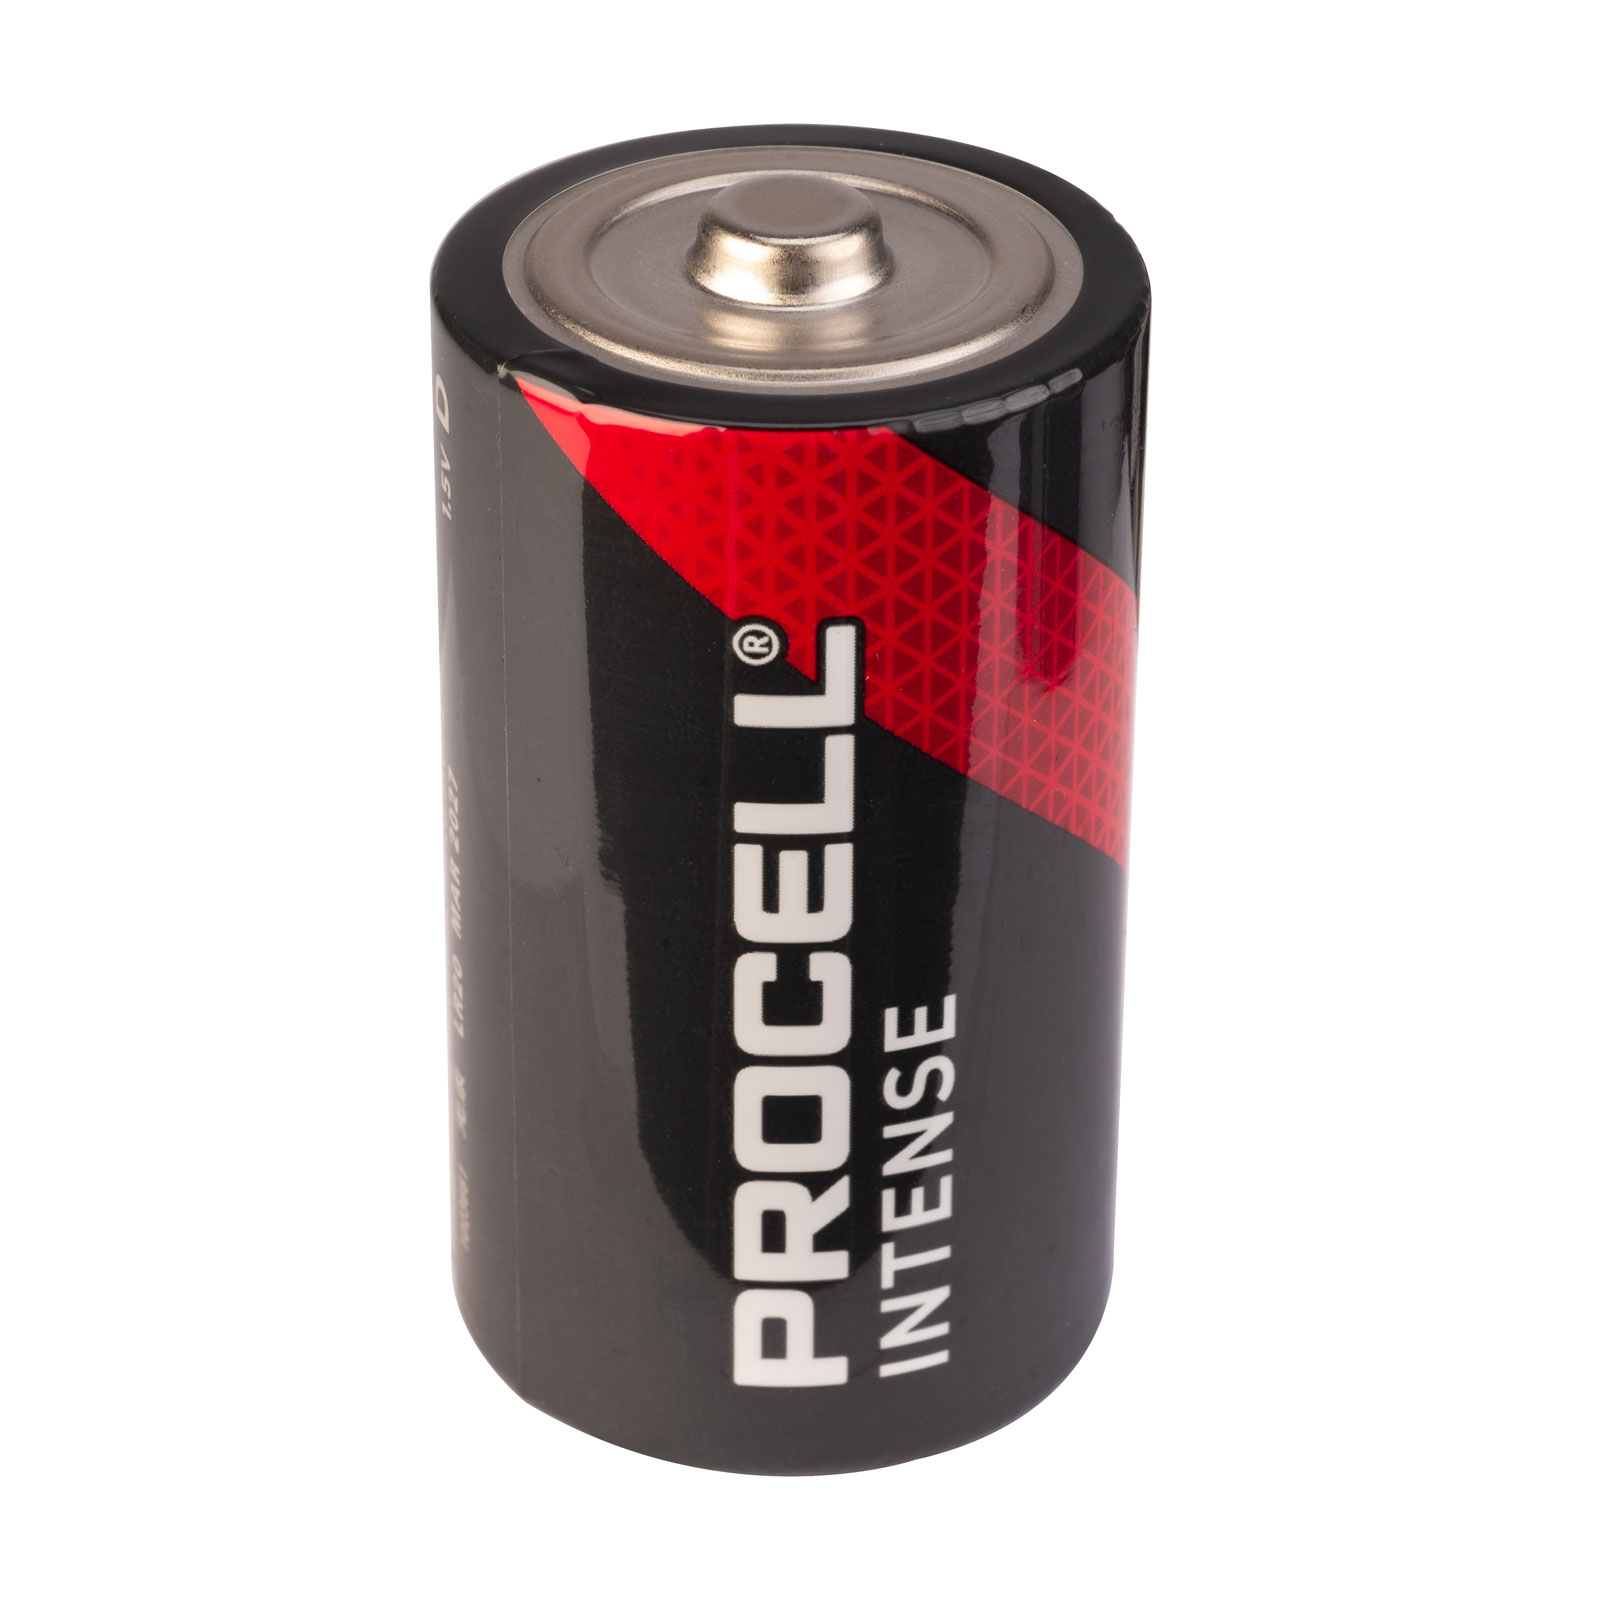 New Duracell Procell 9 Volt Batteries, Pack Of 12, Professional